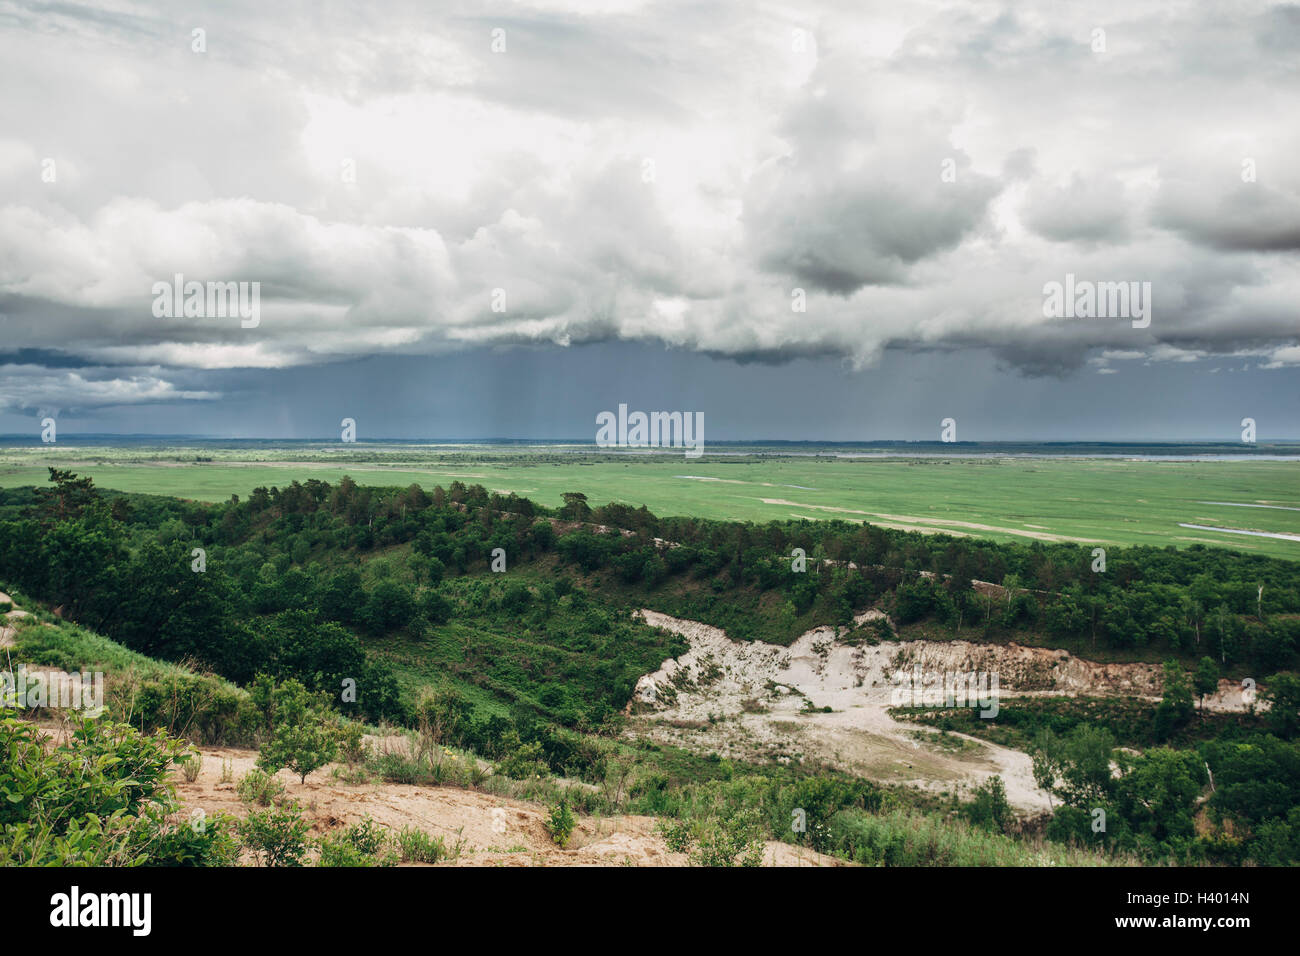 Scenic view of rural landscape against cloudy sky Stock Photo